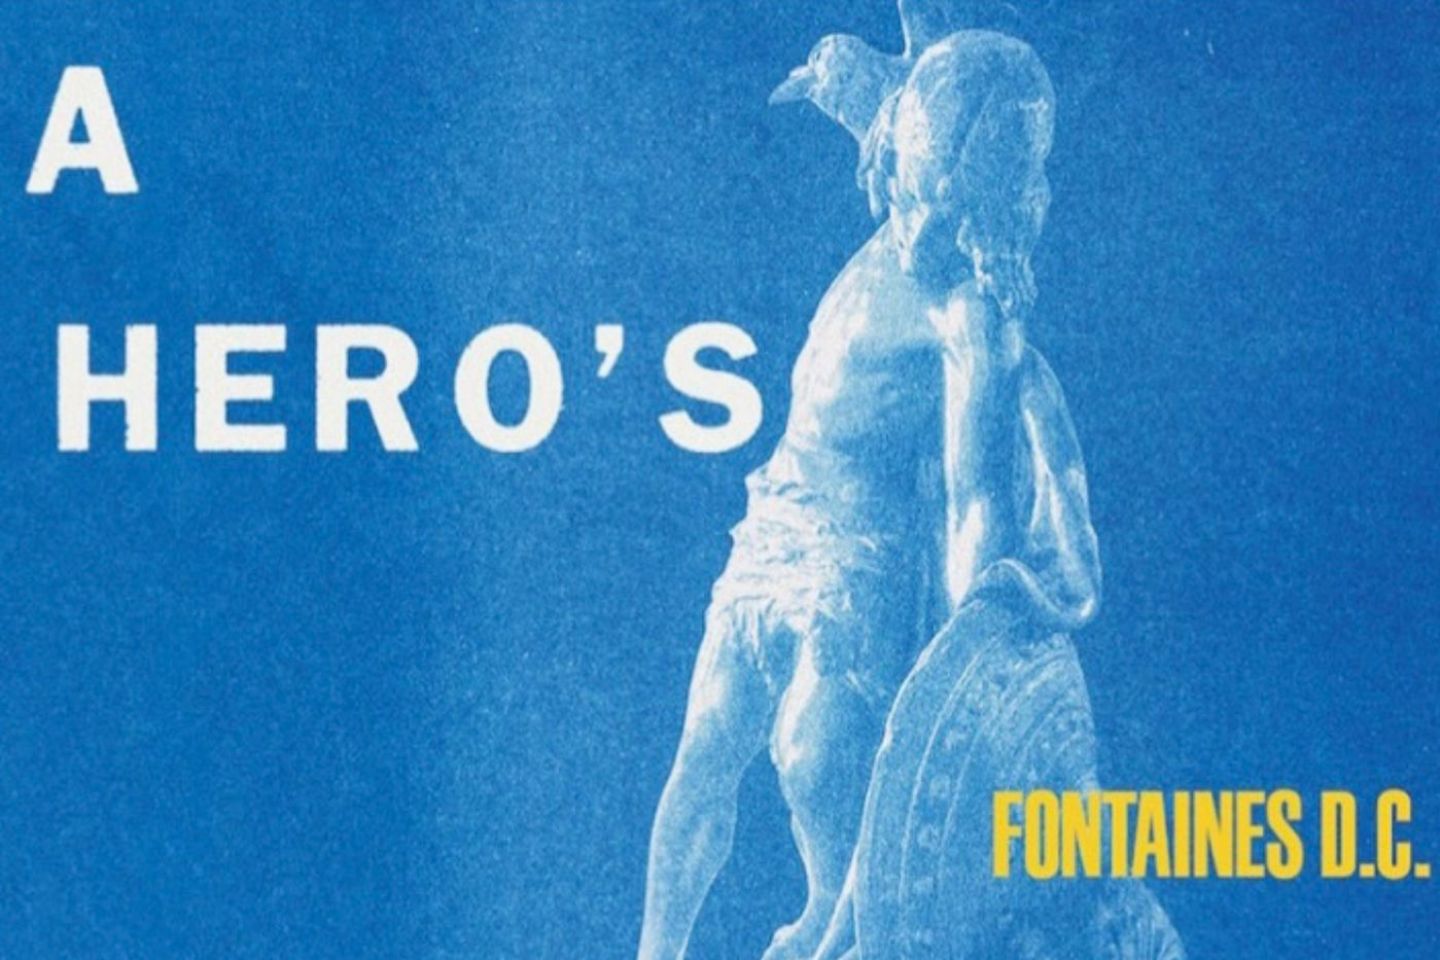 Fontaines D.C. “A Hero’s Death” (Partisan Records, 2020)